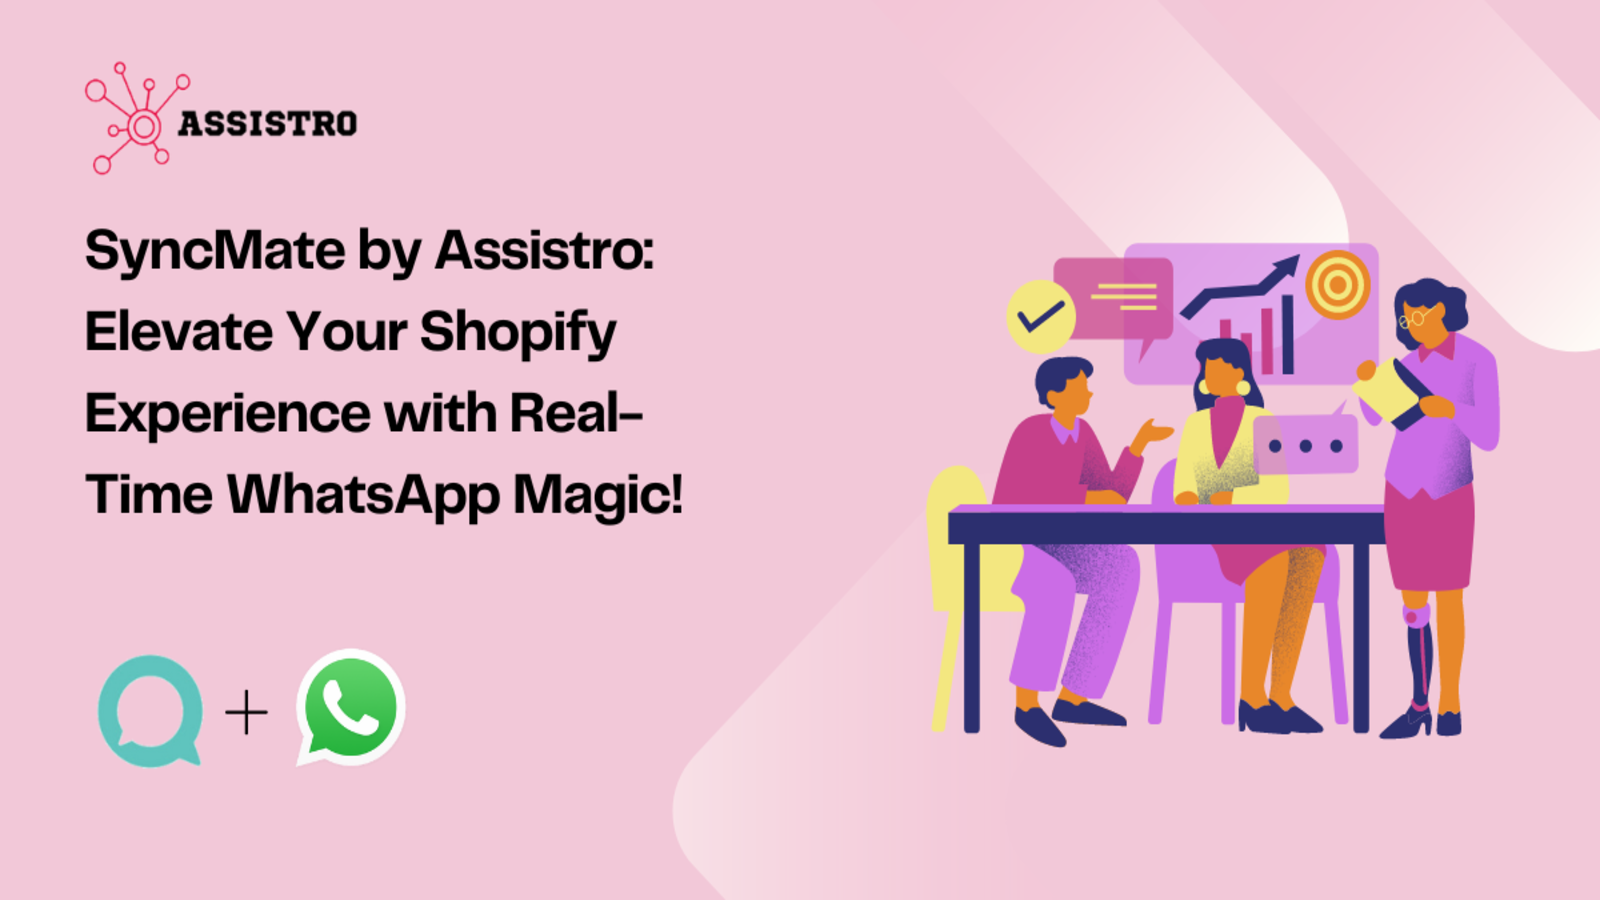 SyncMate by Assistro: Elevate Customer's Shopify Experience